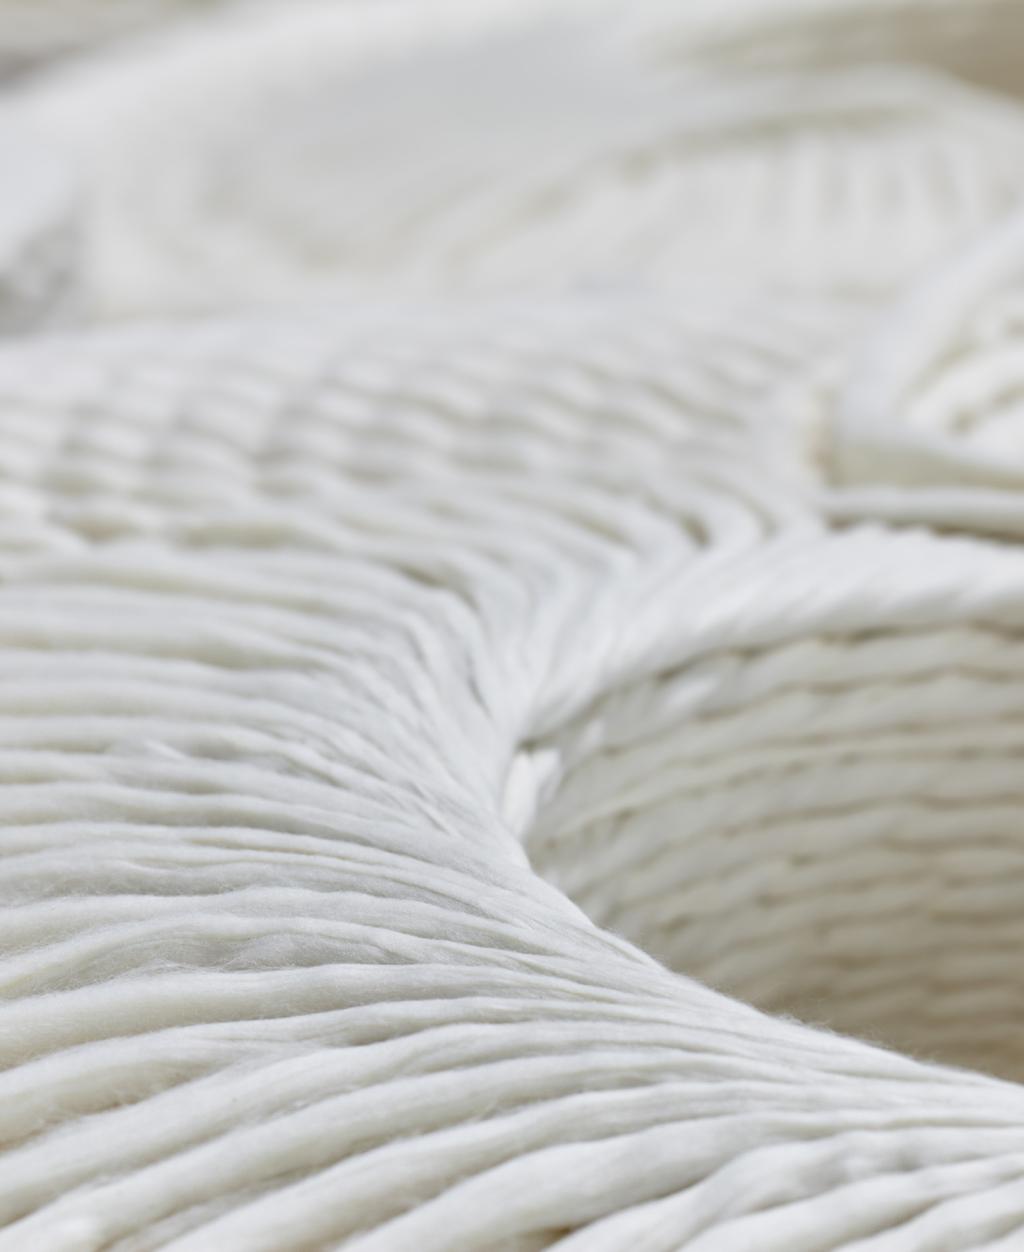 AN EVALUATION OF THE DURABILITY ADVANTAGES OF USING U.S. COTTON IN KNIT FABRICS A RESEARCH WHITE PAPER FROM COTTON COUNCIL INTERNATIONAL STUDY CONDUCTED BY DR.